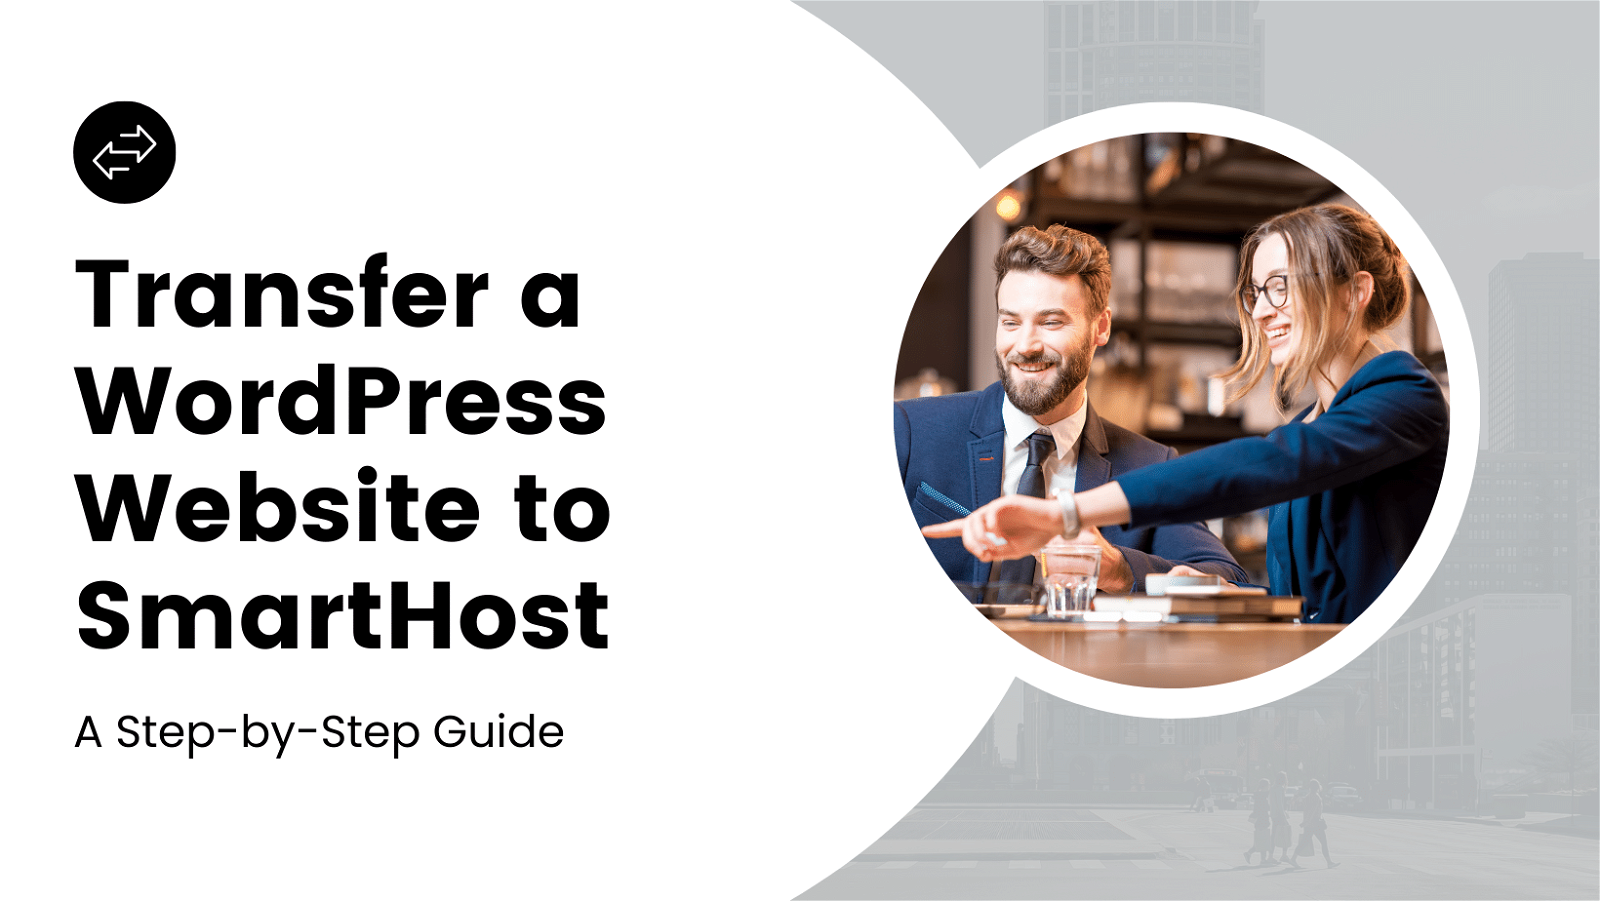 Step-by-step guide on transferring a WordPress website to smarthost.